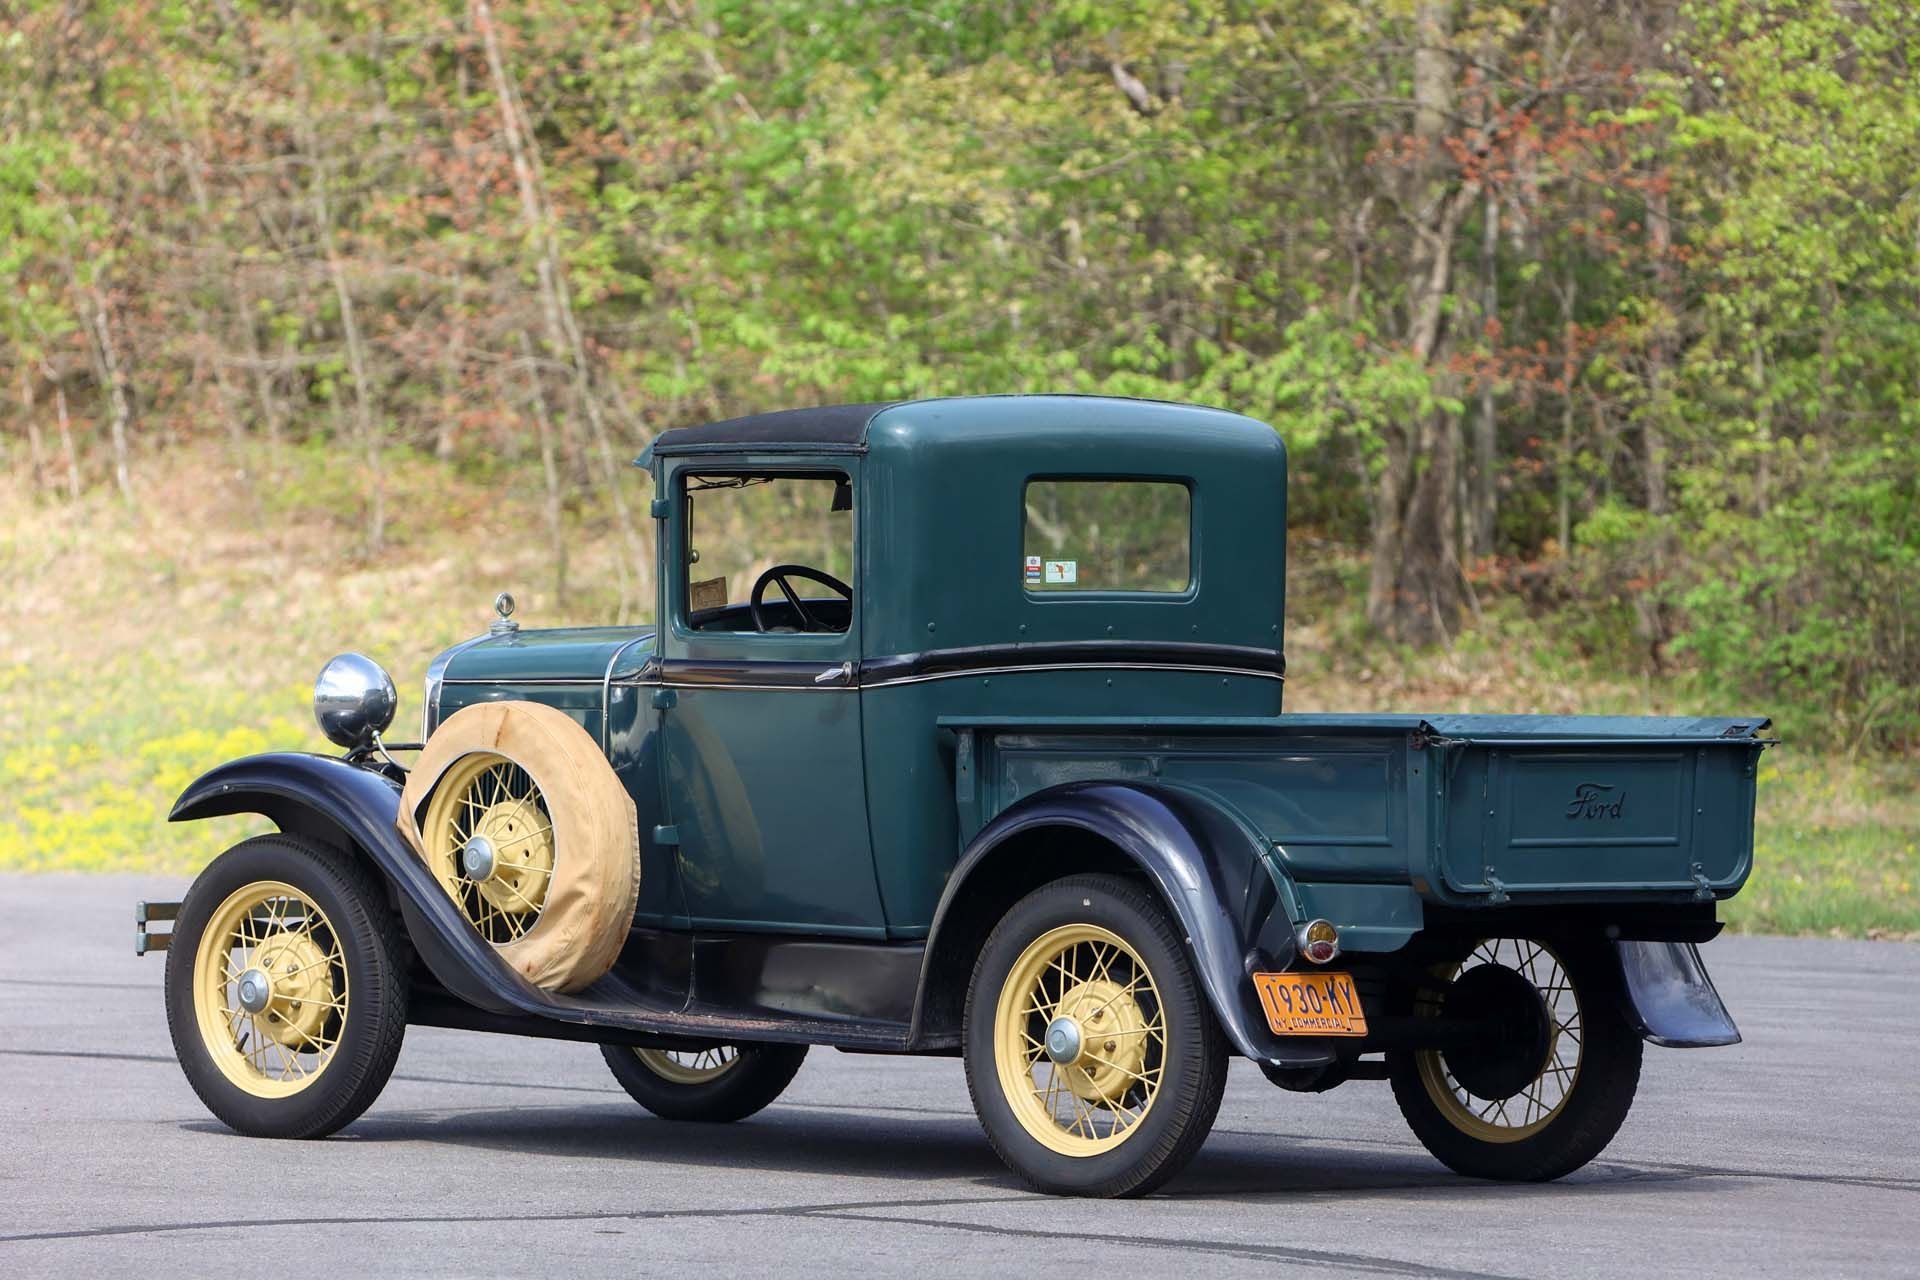 For Sale 1930 Ford Model A DeLuxe Closed Cab Pickup